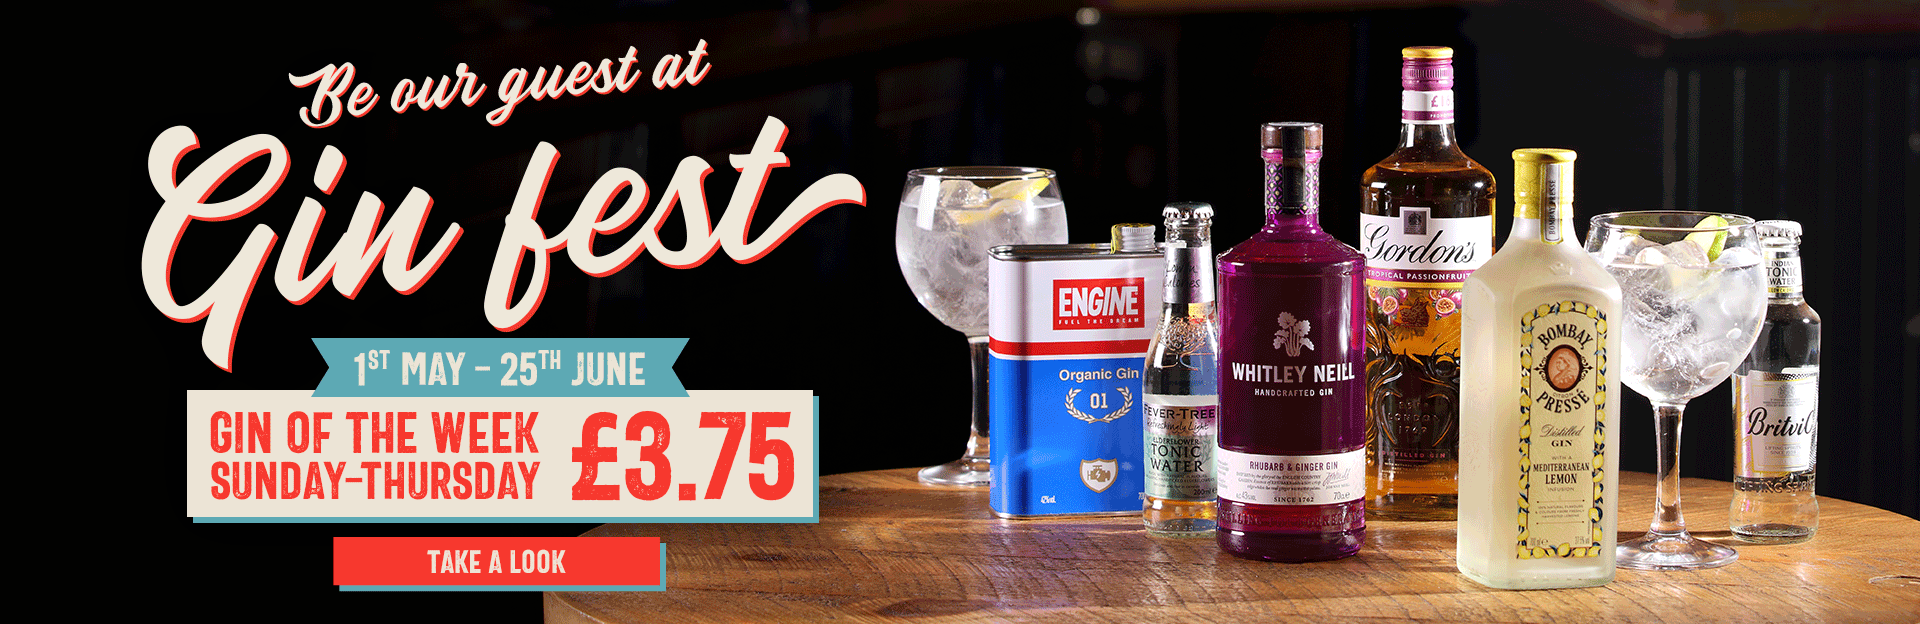 Gin Fest at The Mason's Arms